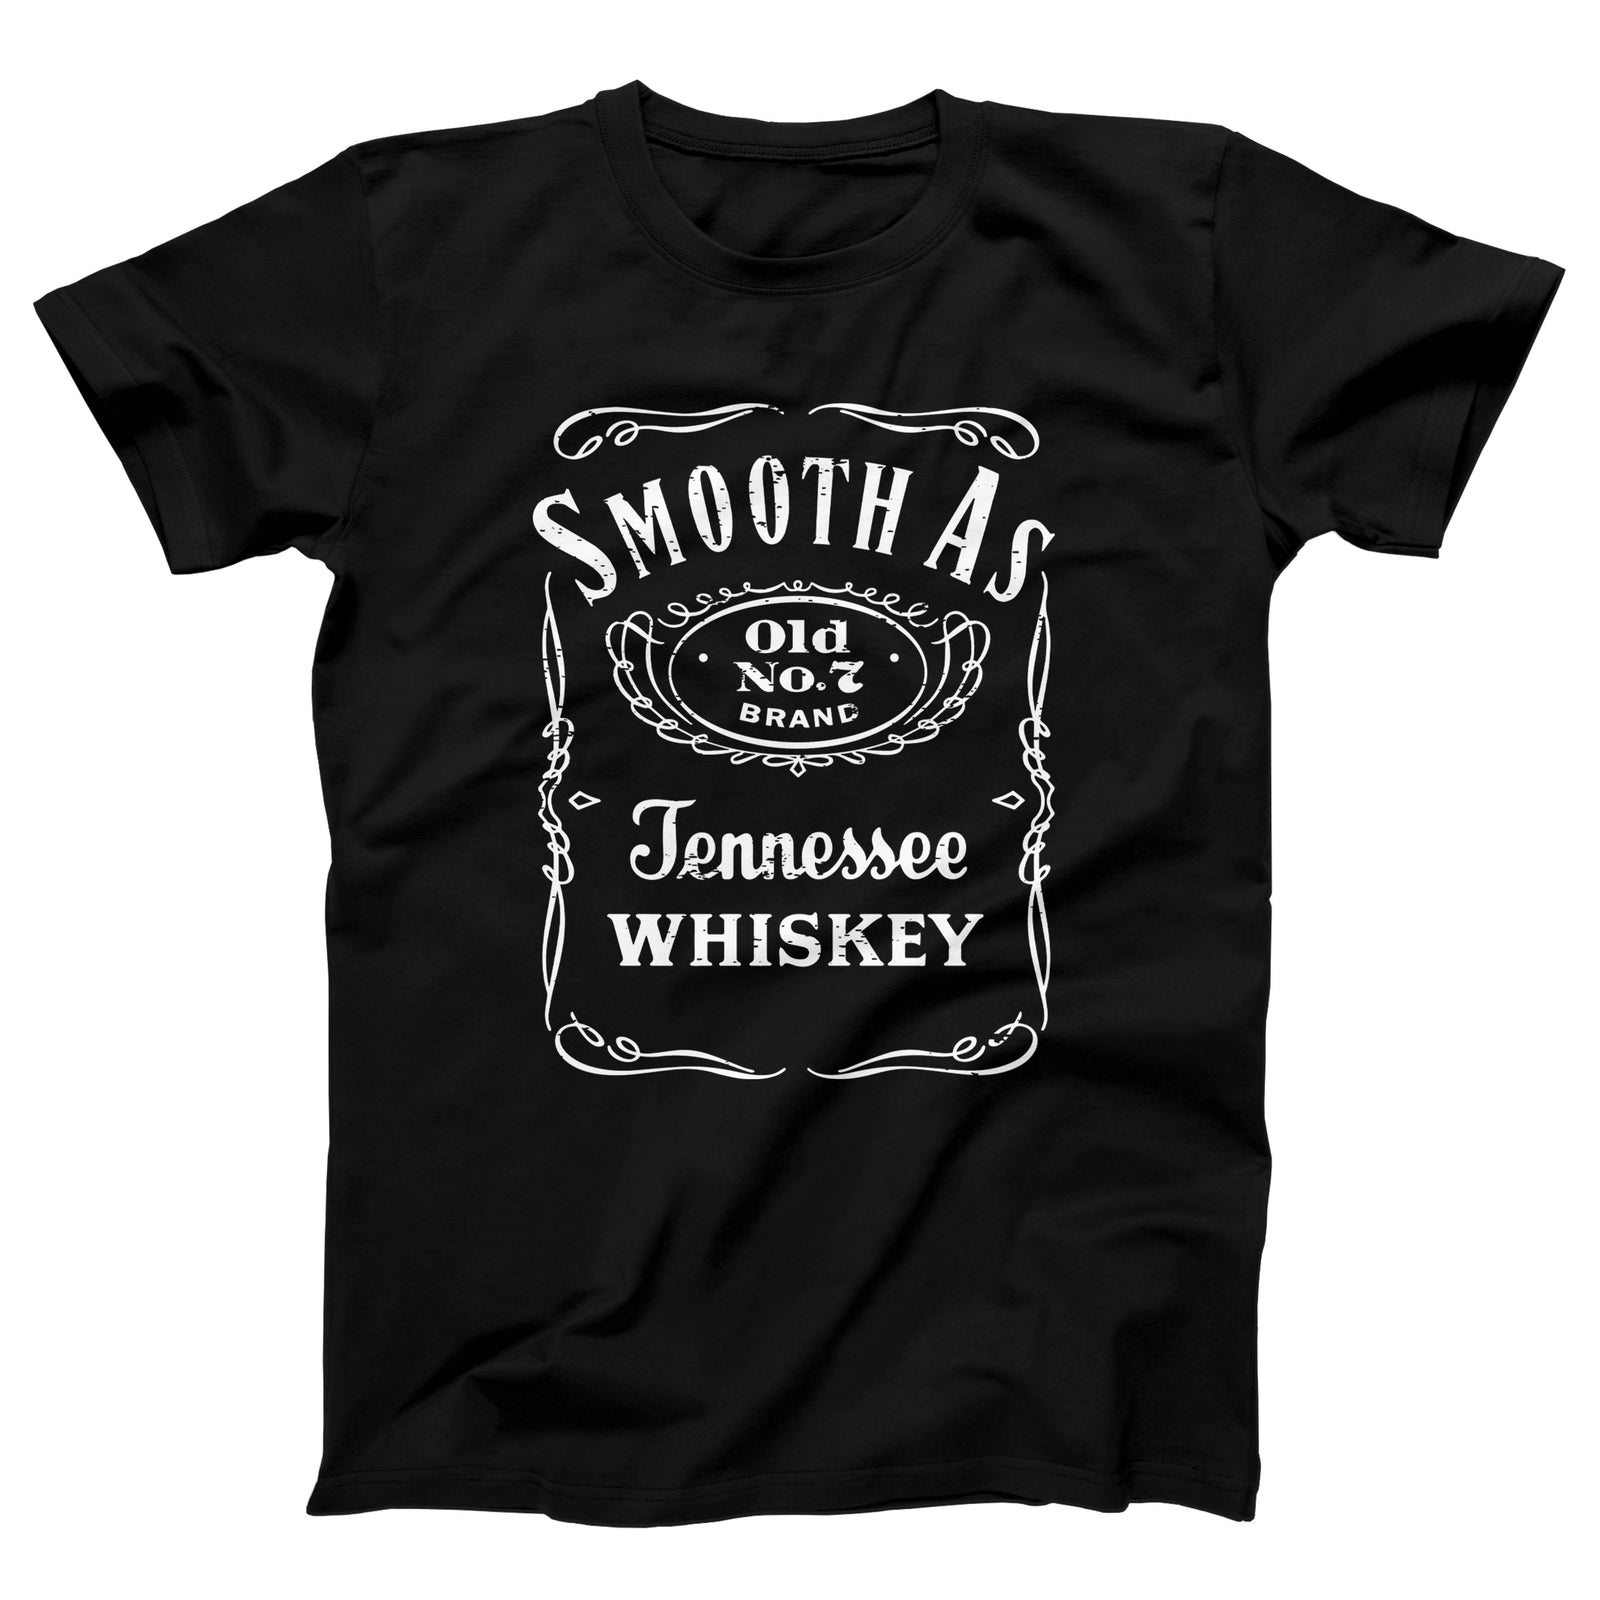 //marionmartigny.com/s/files/1/0274/2488/2766/products/smooth-as-tennessee-whiskey-menunisex-t-shirt-475497_5000x.jpg?v=1622708123 5000w,
    //marionmartigny.com/s/files/1/0274/2488/2766/products/smooth-as-tennessee-whiskey-menunisex-t-shirt-475497_4500x.jpg?v=1622708123 4500w,
    //marionmartigny.com/s/files/1/0274/2488/2766/products/smooth-as-tennessee-whiskey-menunisex-t-shirt-475497_4000x.jpg?v=1622708123 4000w,
    //marionmartigny.com/s/files/1/0274/2488/2766/products/smooth-as-tennessee-whiskey-menunisex-t-shirt-475497_3500x.jpg?v=1622708123 3500w,
    //marionmartigny.com/s/files/1/0274/2488/2766/products/smooth-as-tennessee-whiskey-menunisex-t-shirt-475497_3000x.jpg?v=1622708123 3000w,
    //marionmartigny.com/s/files/1/0274/2488/2766/products/smooth-as-tennessee-whiskey-menunisex-t-shirt-475497_2500x.jpg?v=1622708123 2500w,
    //marionmartigny.com/s/files/1/0274/2488/2766/products/smooth-as-tennessee-whiskey-menunisex-t-shirt-475497_2000x.jpg?v=1622708123 2000w,
    //marionmartigny.com/s/files/1/0274/2488/2766/products/smooth-as-tennessee-whiskey-menunisex-t-shirt-475497_1800x.jpg?v=1622708123 1800w,
    //marionmartigny.com/s/files/1/0274/2488/2766/products/smooth-as-tennessee-whiskey-menunisex-t-shirt-475497_1600x.jpg?v=1622708123 1600w,
    //marionmartigny.com/s/files/1/0274/2488/2766/products/smooth-as-tennessee-whiskey-menunisex-t-shirt-475497_1400x.jpg?v=1622708123 1400w,
    //marionmartigny.com/s/files/1/0274/2488/2766/products/smooth-as-tennessee-whiskey-menunisex-t-shirt-475497_1200x.jpg?v=1622708123 1200w,
    //marionmartigny.com/s/files/1/0274/2488/2766/products/smooth-as-tennessee-whiskey-menunisex-t-shirt-475497_1000x.jpg?v=1622708123 1000w,
    //marionmartigny.com/s/files/1/0274/2488/2766/products/smooth-as-tennessee-whiskey-menunisex-t-shirt-475497_800x.jpg?v=1622708123 800w,
    //marionmartigny.com/s/files/1/0274/2488/2766/products/smooth-as-tennessee-whiskey-menunisex-t-shirt-475497_600x.jpg?v=1622708123 600w,
    //marionmartigny.com/s/files/1/0274/2488/2766/products/smooth-as-tennessee-whiskey-menunisex-t-shirt-475497_400x.jpg?v=1622708123 400w,
    //marionmartigny.com/s/files/1/0274/2488/2766/products/smooth-as-tennessee-whiskey-menunisex-t-shirt-475497_200x.jpg?v=1622708123 200w